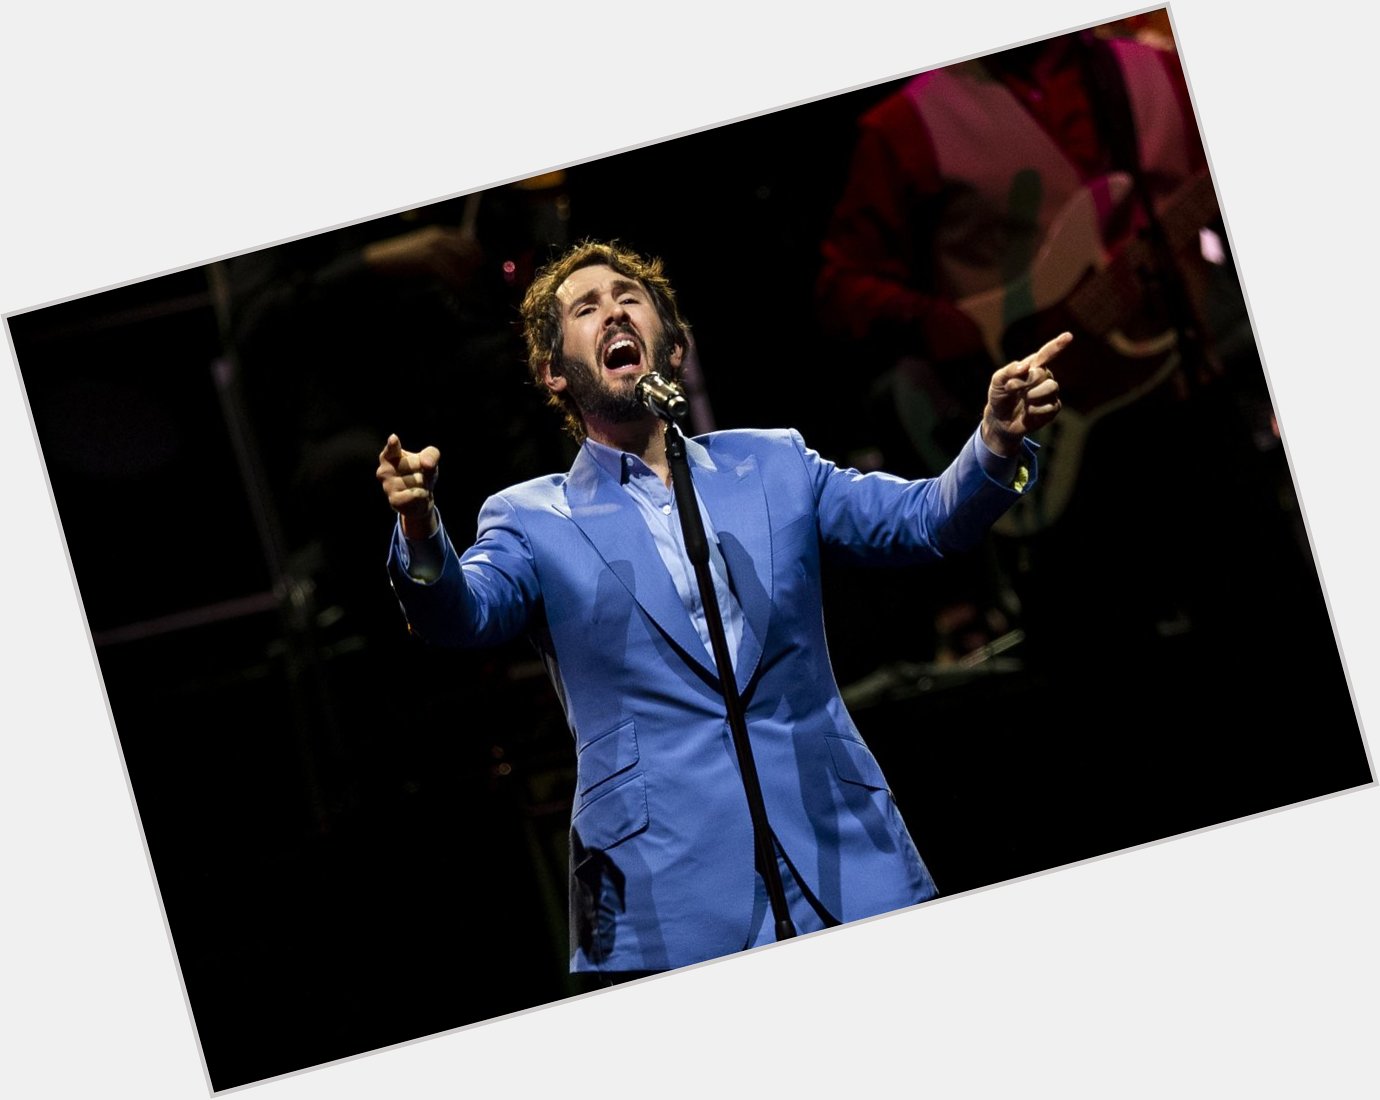 Singing happy birthday to Josh Groban today  Do you have a favorite Groban song to sing along to? 